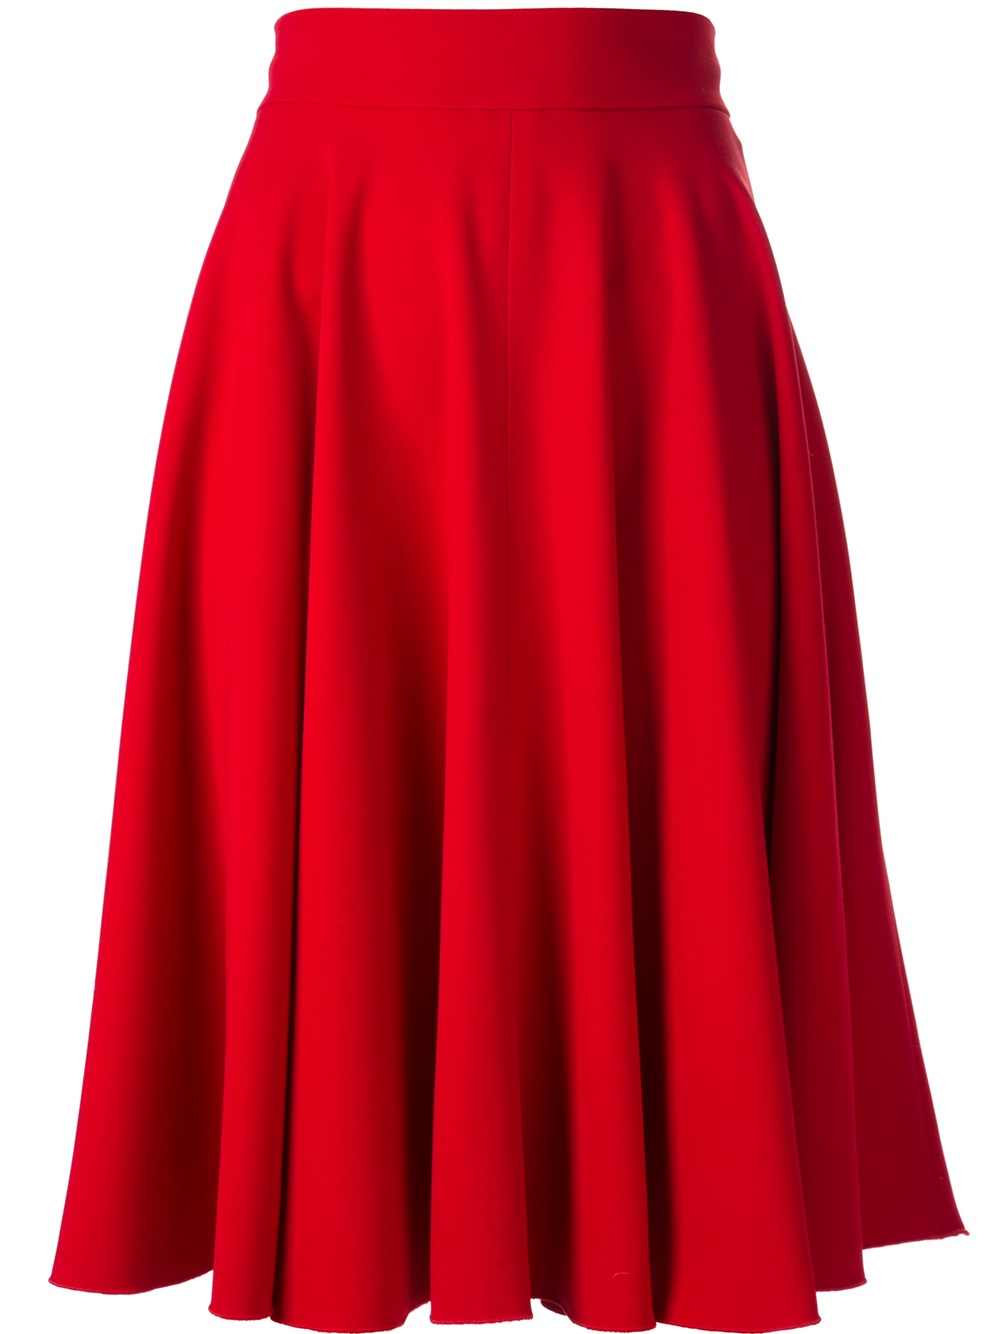 Lyst - Dolce & Gabbana Pleated Skirt in Red